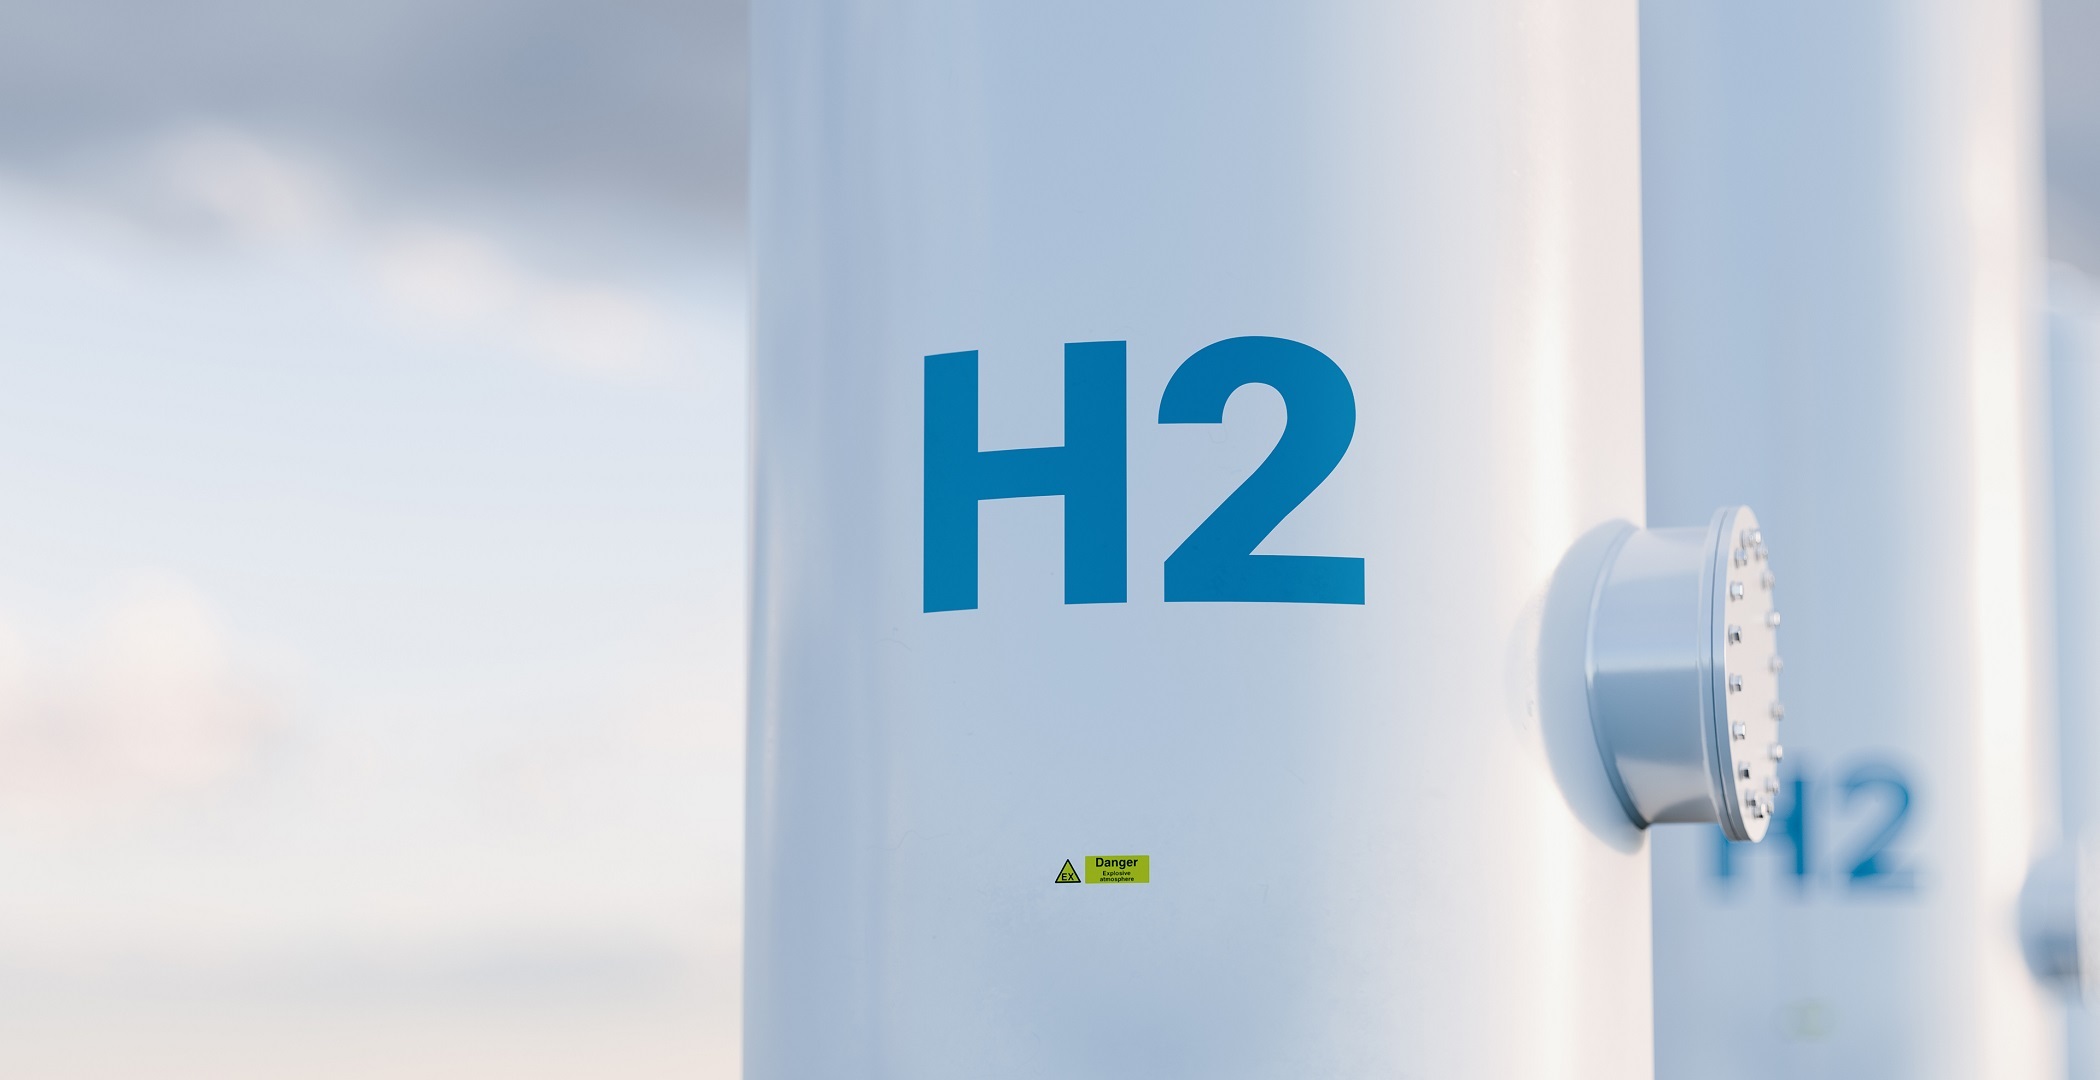 Amazon Buys Green Hydrogen to Power Transportation & Buildings